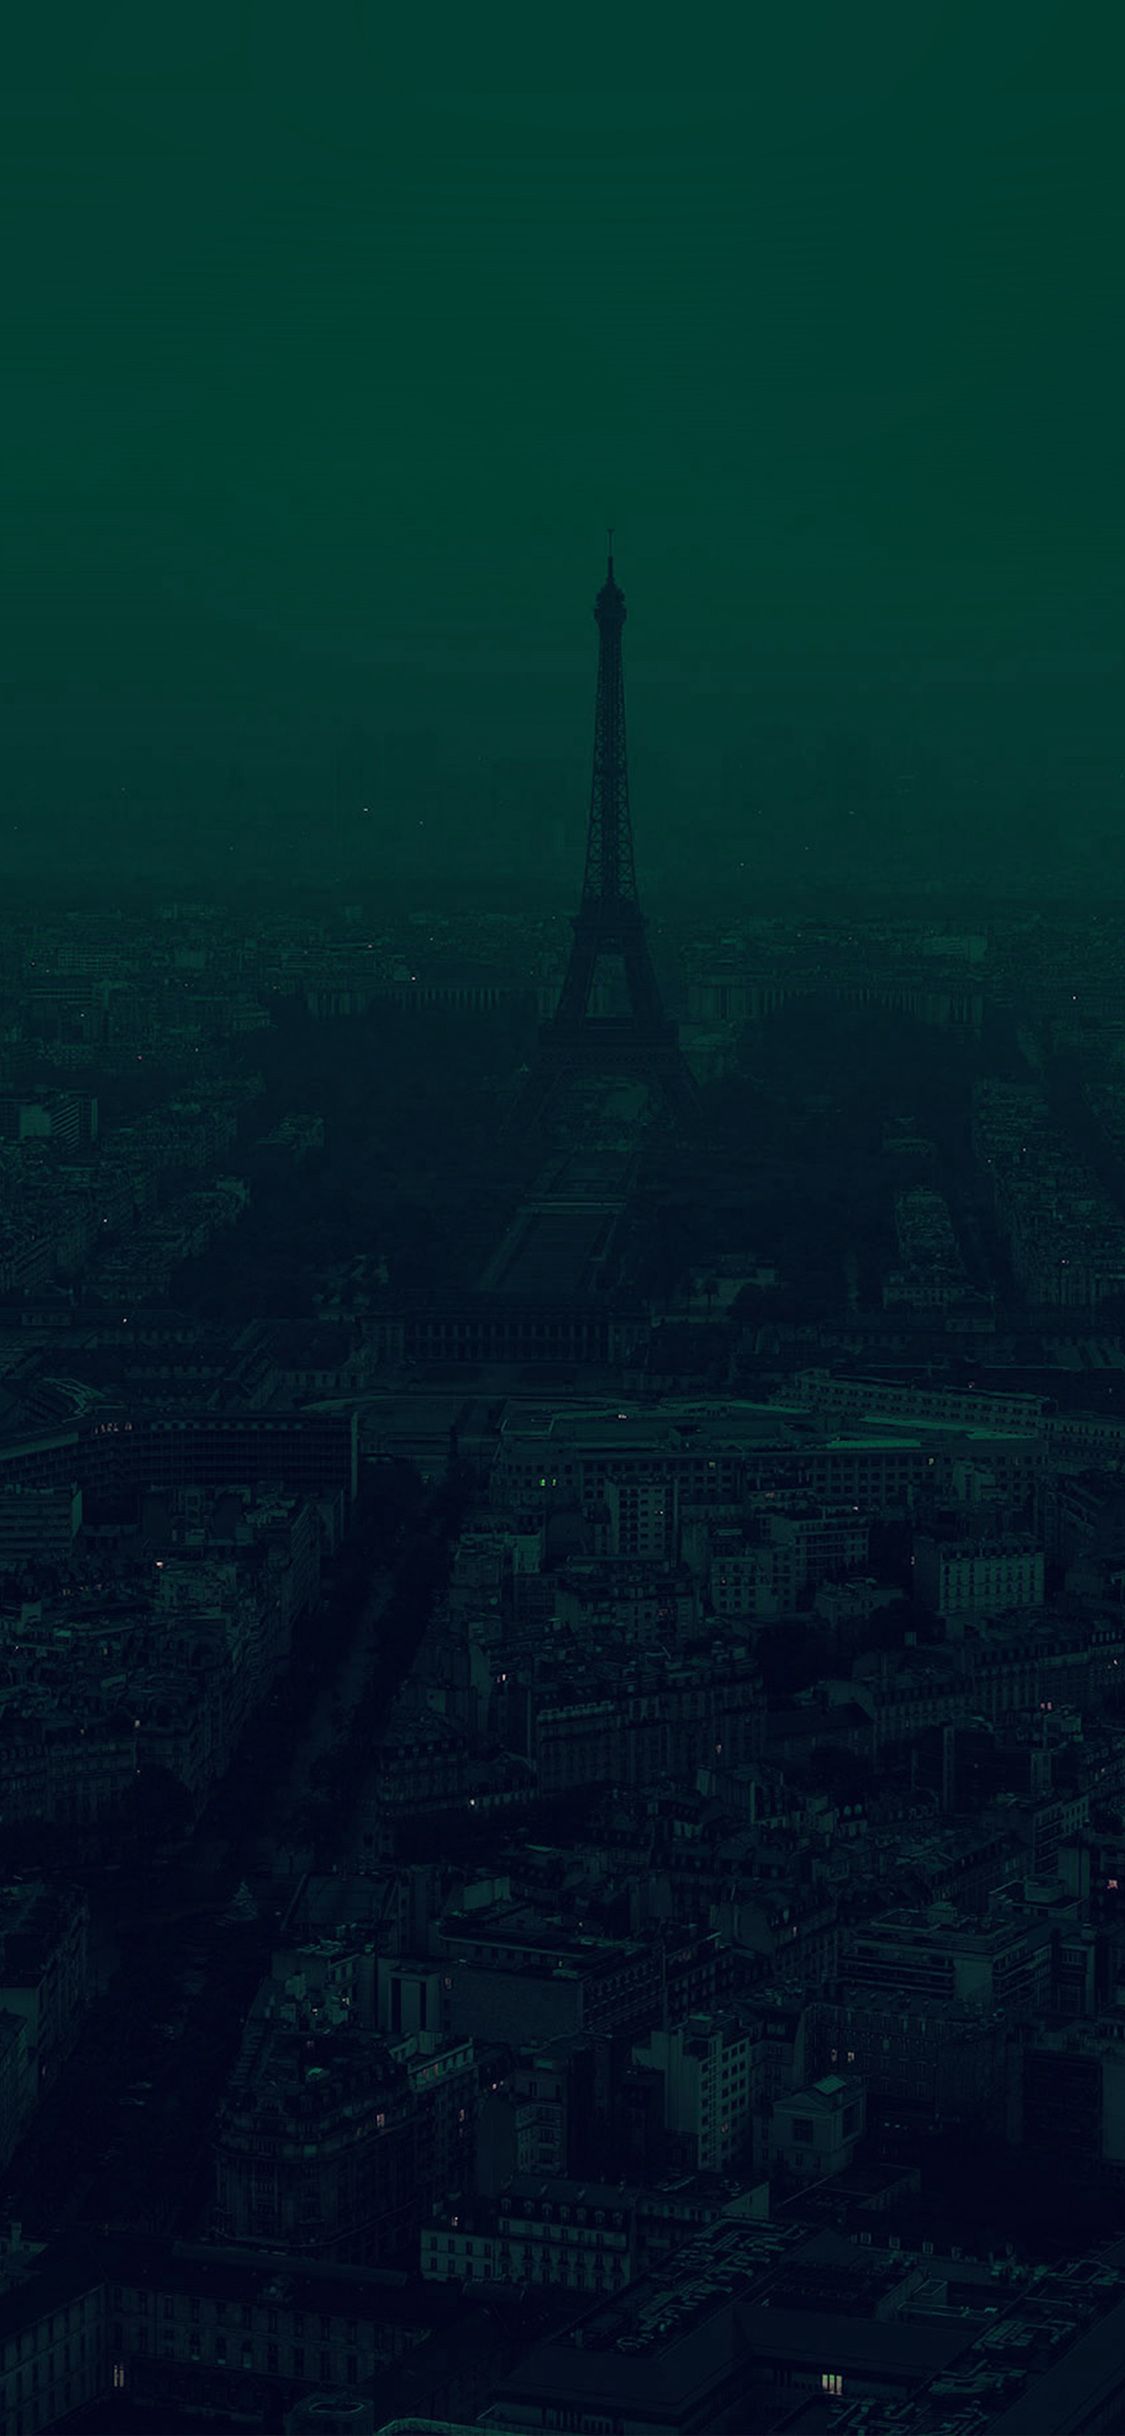 Dark Green Aesthetic Wallpapers Wallpaper Cave H e l l o l o v e l i e s this week i'm bringing you 50 shades of green, from pastels to deep. dark green aesthetic wallpapers